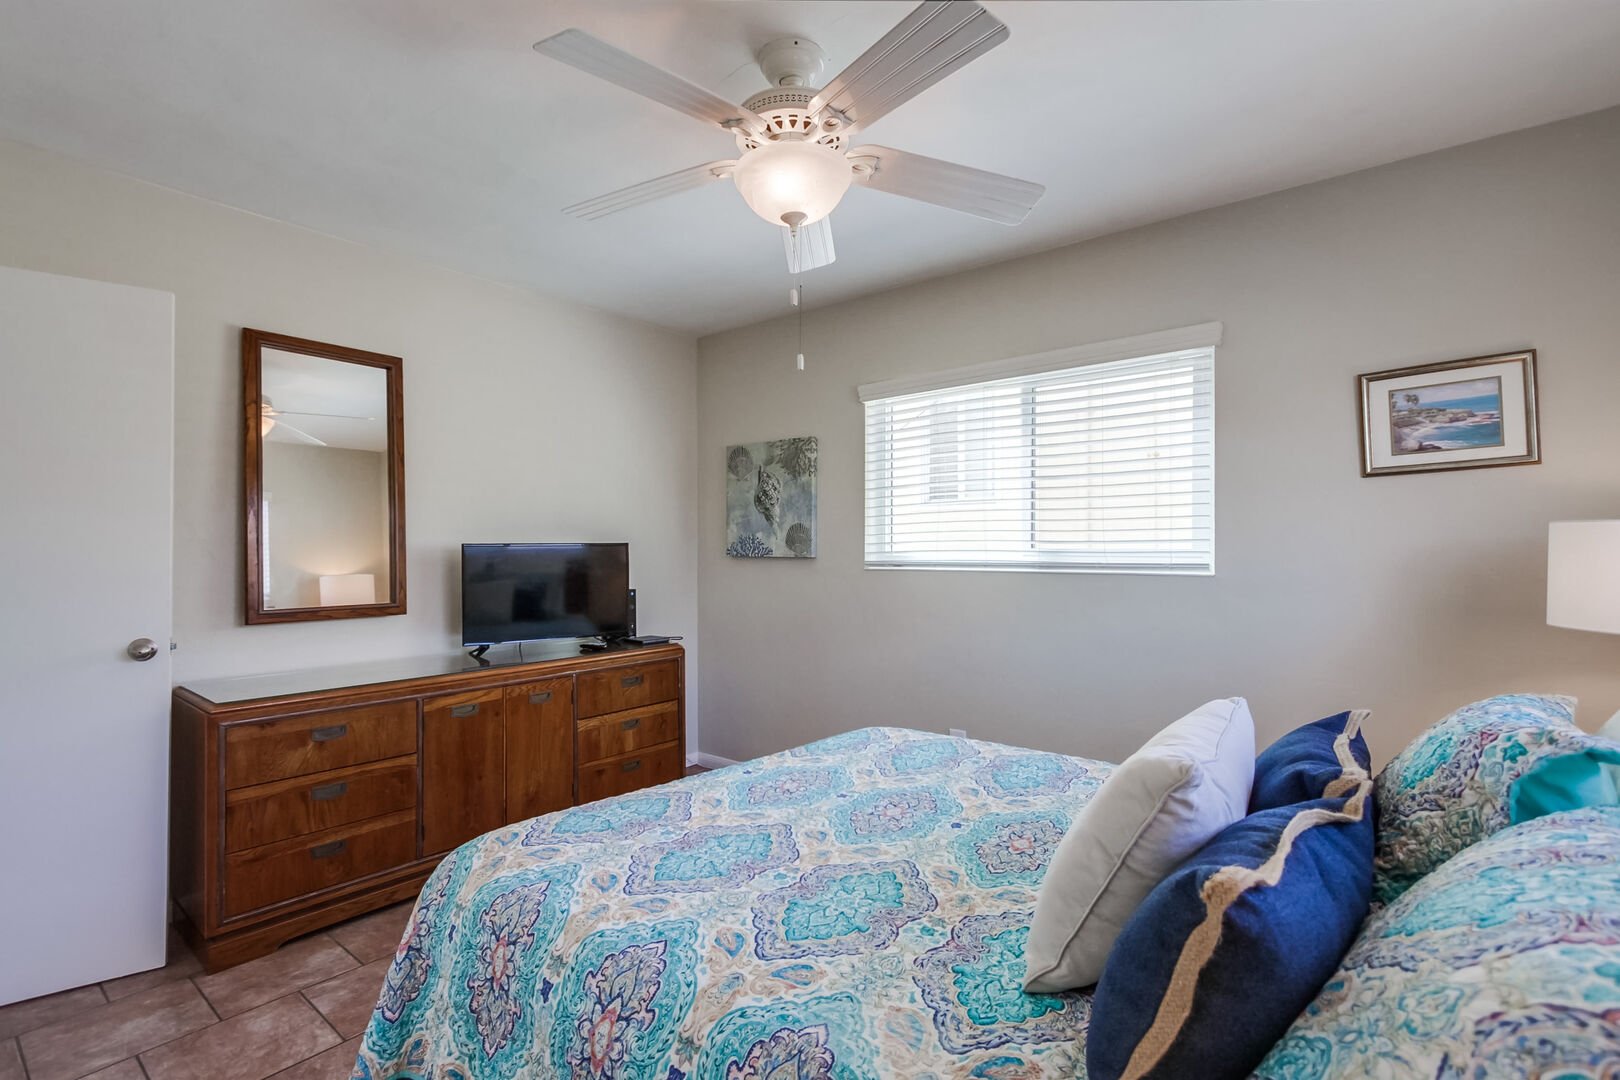 Spacious bedroom with queen size bed, ceiling fan, dresser and closet storage